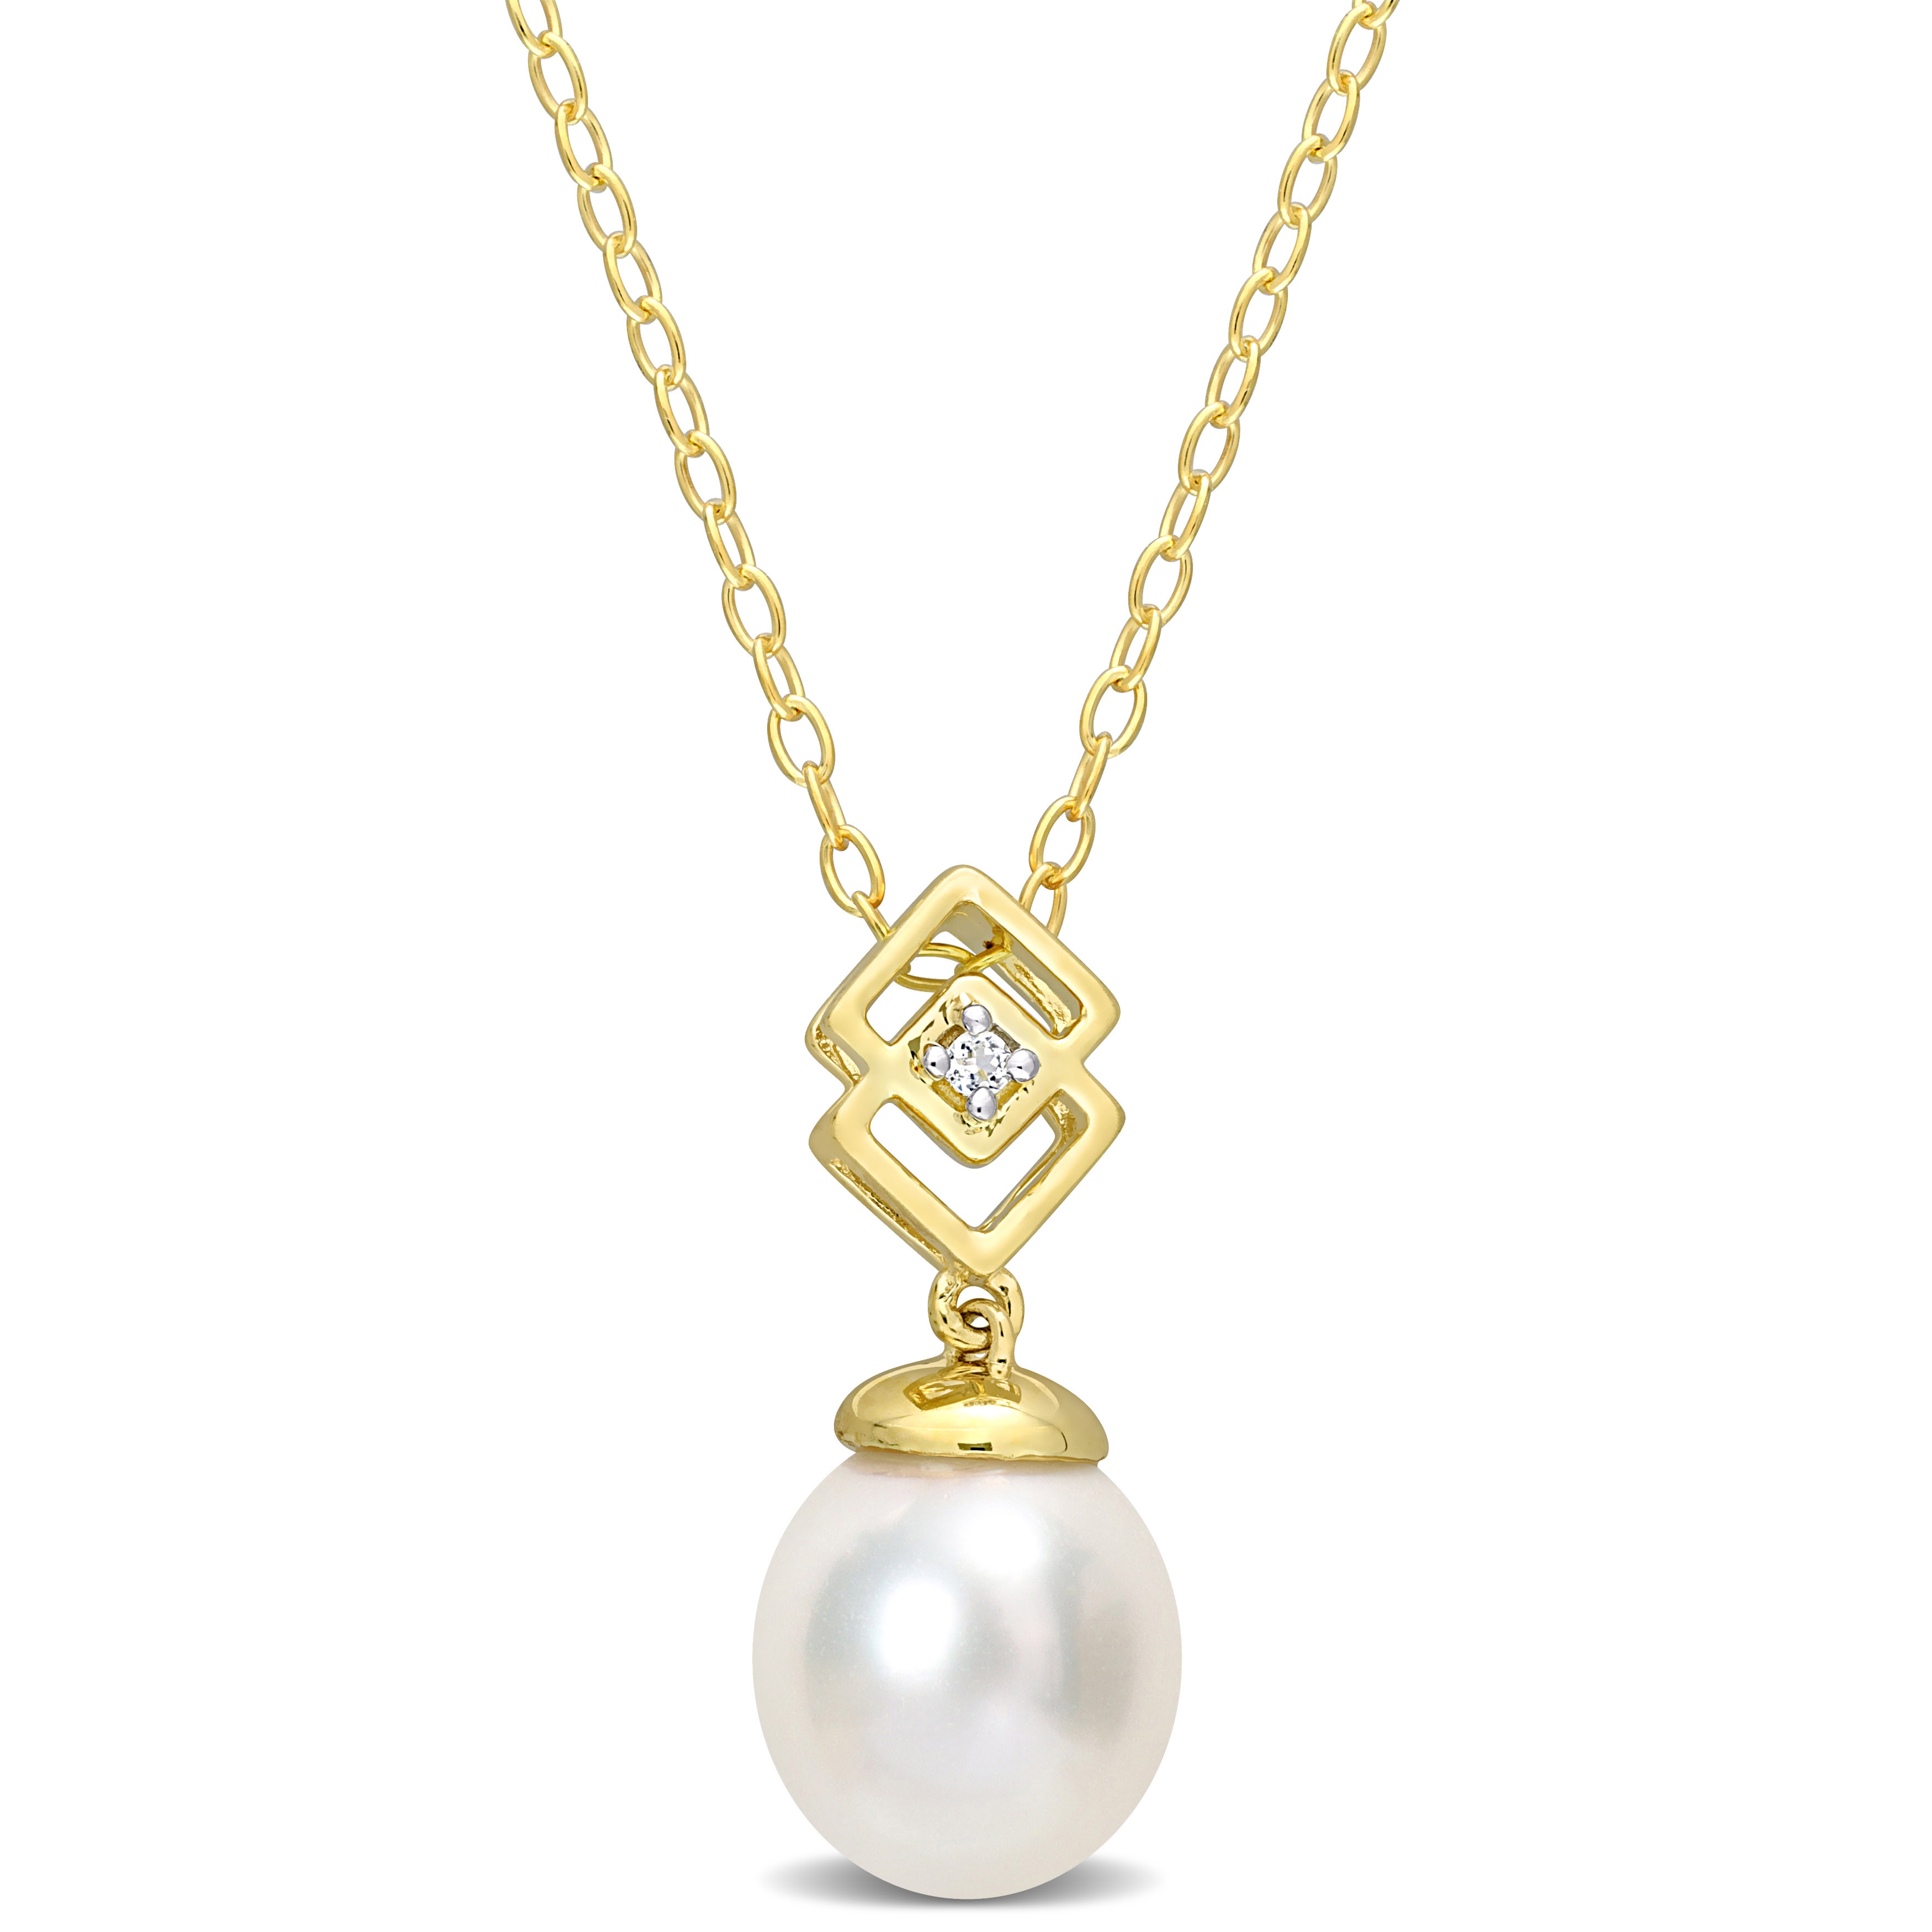 8-9 MM South Sea Cultured Pearl and White Topaz Drop Pendant with Chain in Yellow Plated Sterling Silver - 18 in.